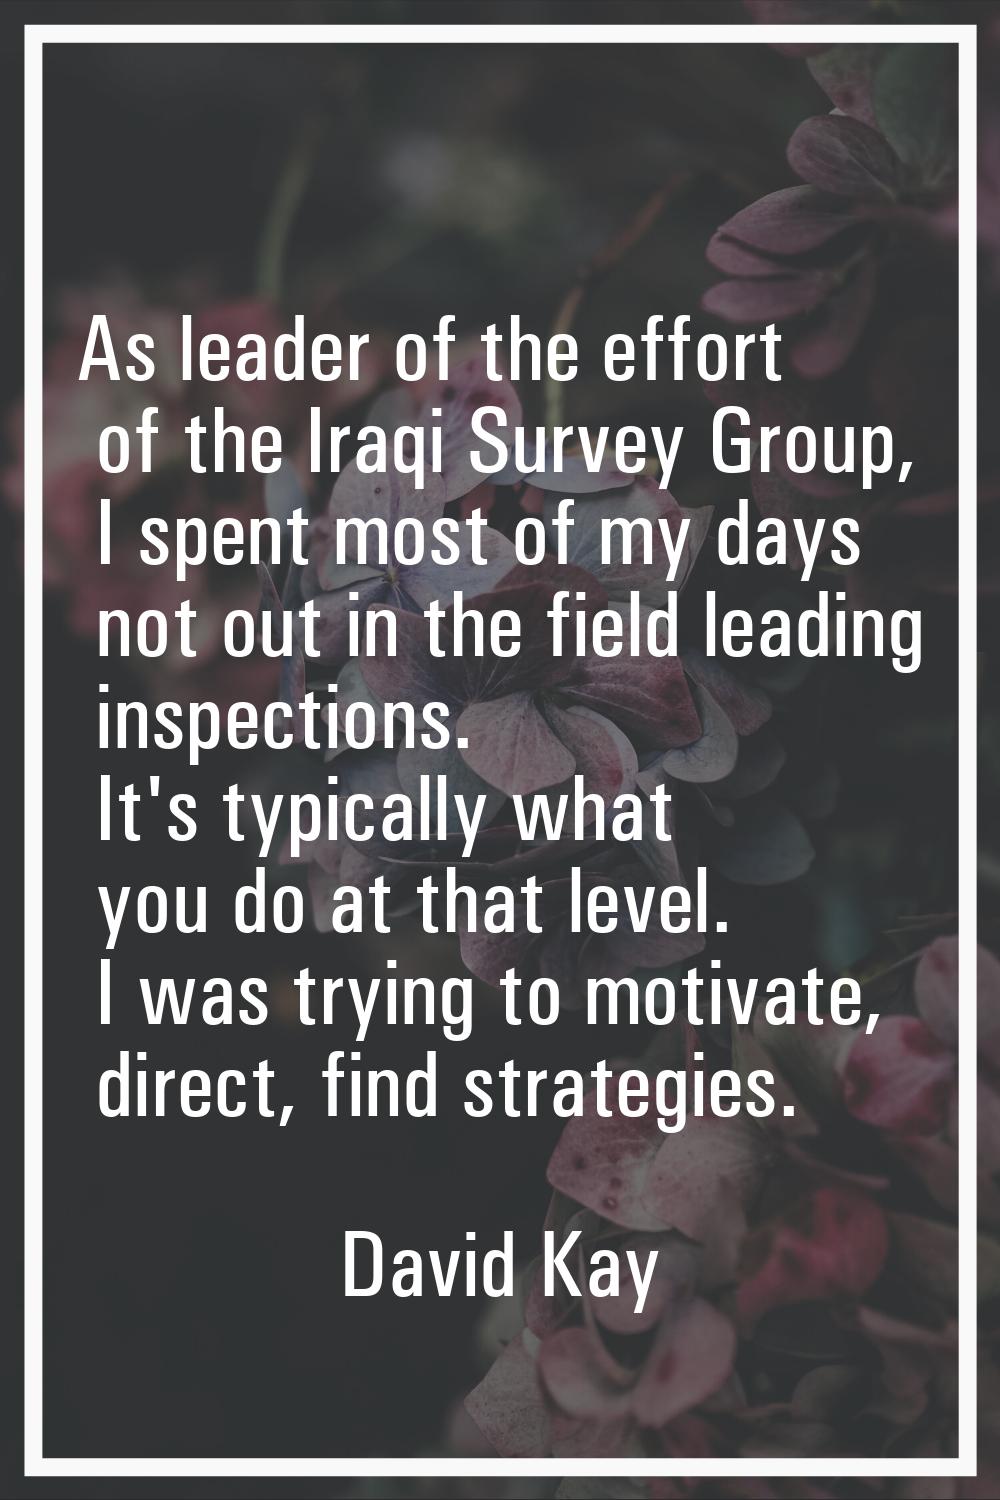 As leader of the effort of the Iraqi Survey Group, I spent most of my days not out in the field lea